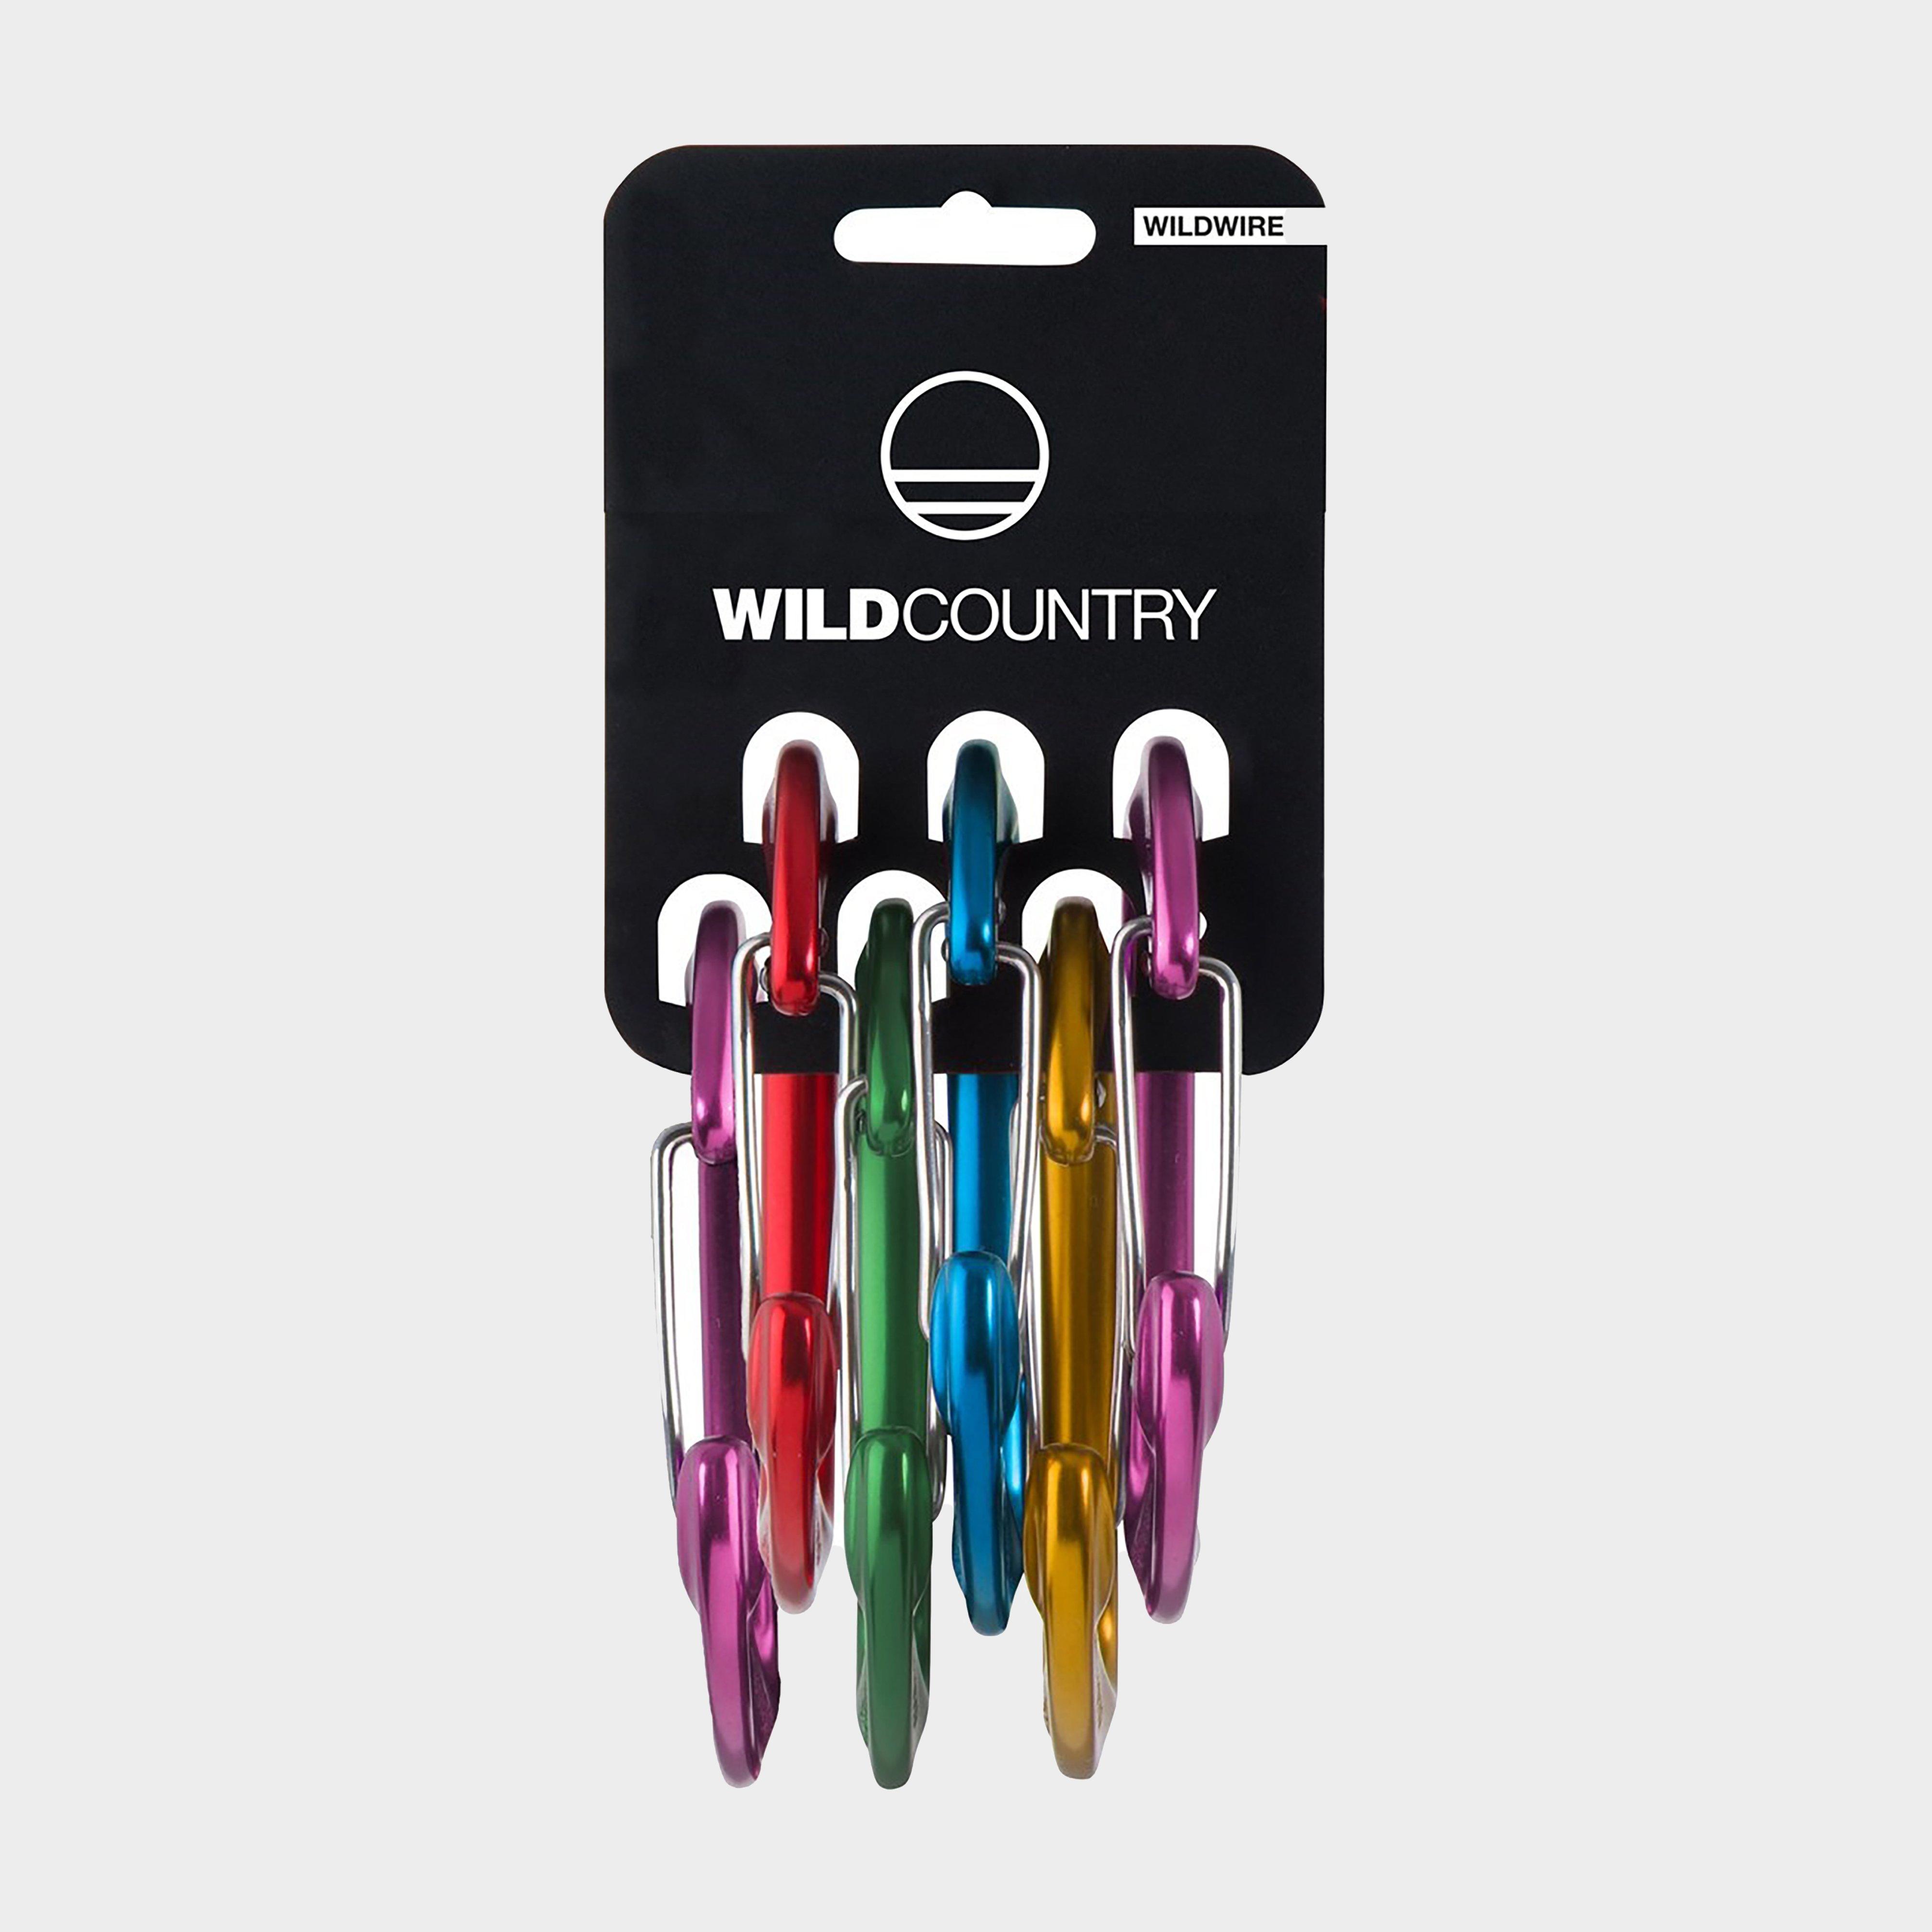  WILD COUNTRY Wildwire Carabiner Rack 6 Pack, Multi Coloured